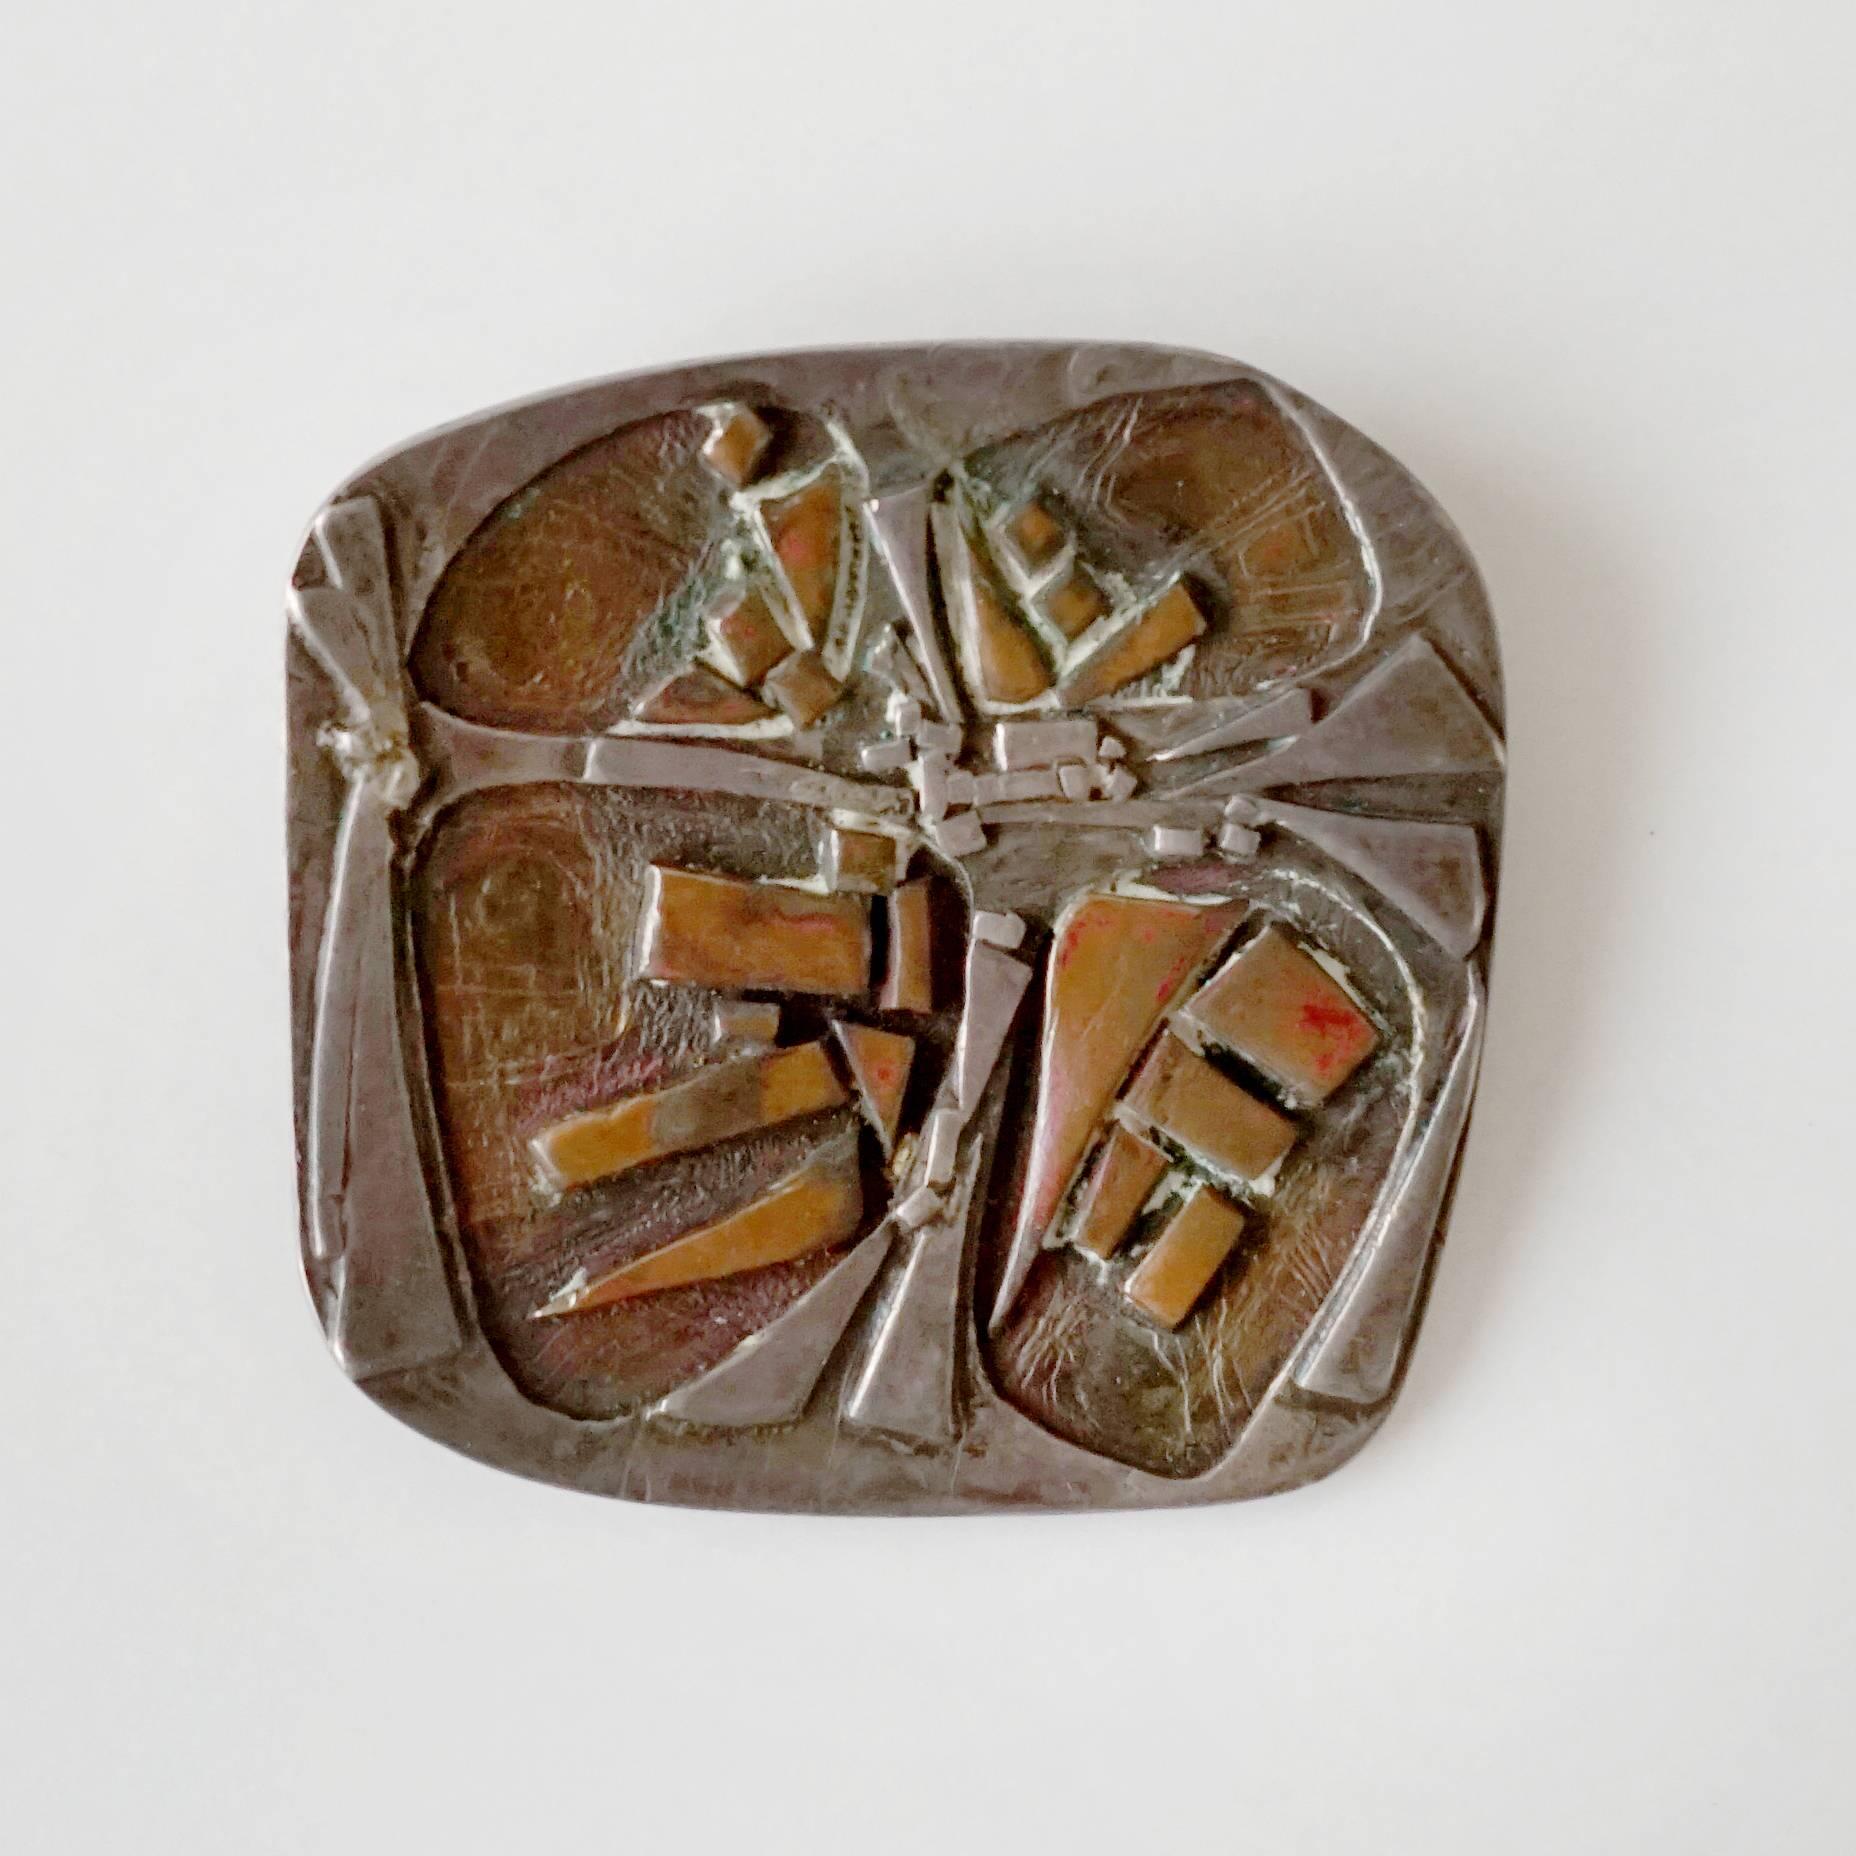 Mixed metals brooch by sculptor, Stephen Daly. This bronze and silver work is an excellent object representing Daly’s Cranbrook experience. 1960s. Signed on the back. 

Stephen Daly – Studied at San Jose State and created a body of work in